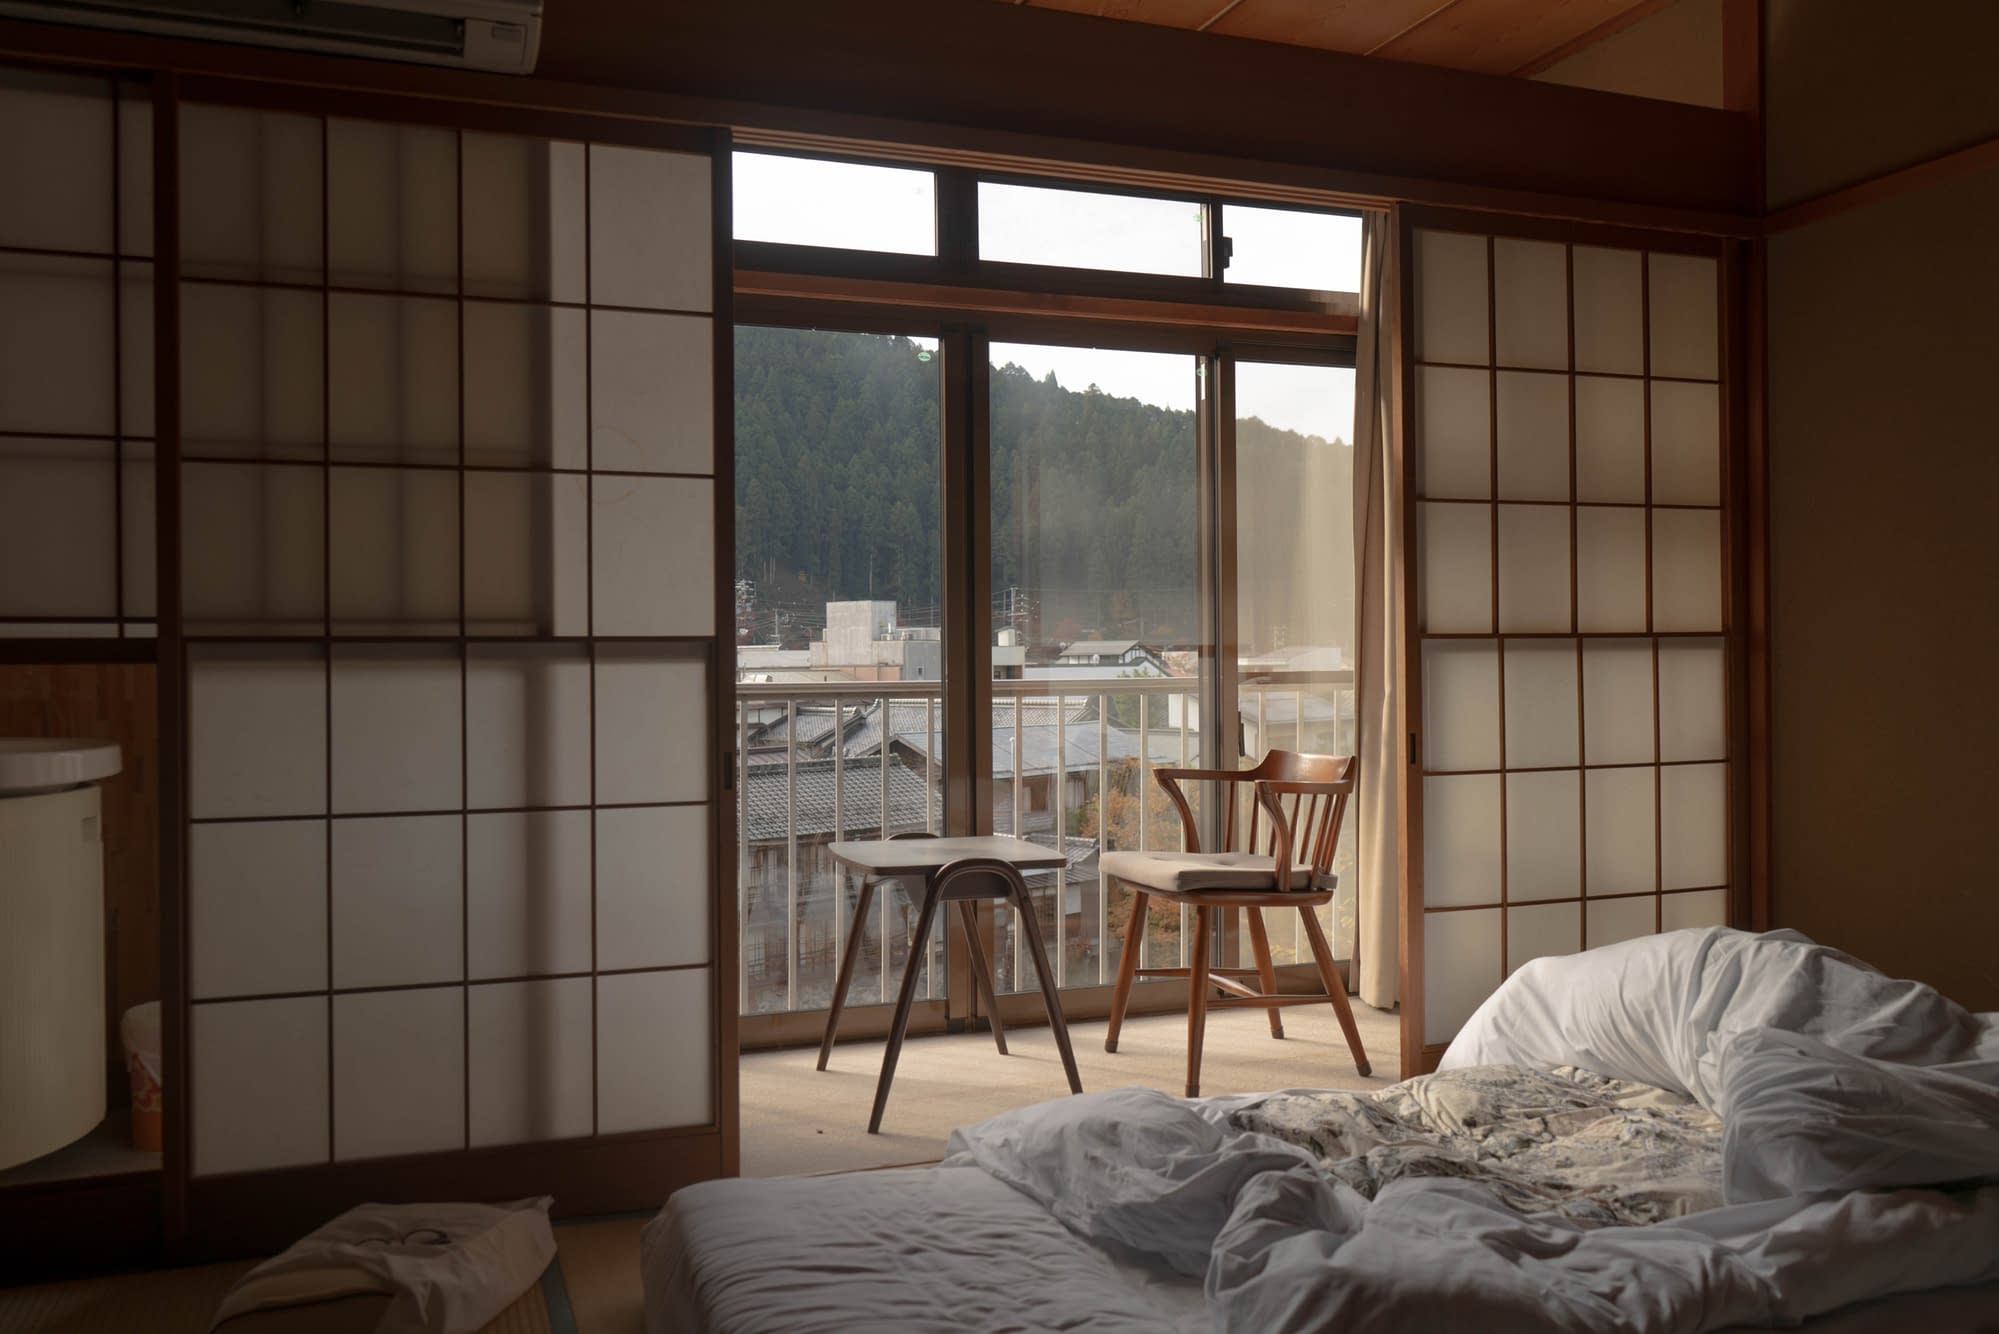 Japanese accommodation with a light, airy room. A balcony with chairs and blue sky in the background.